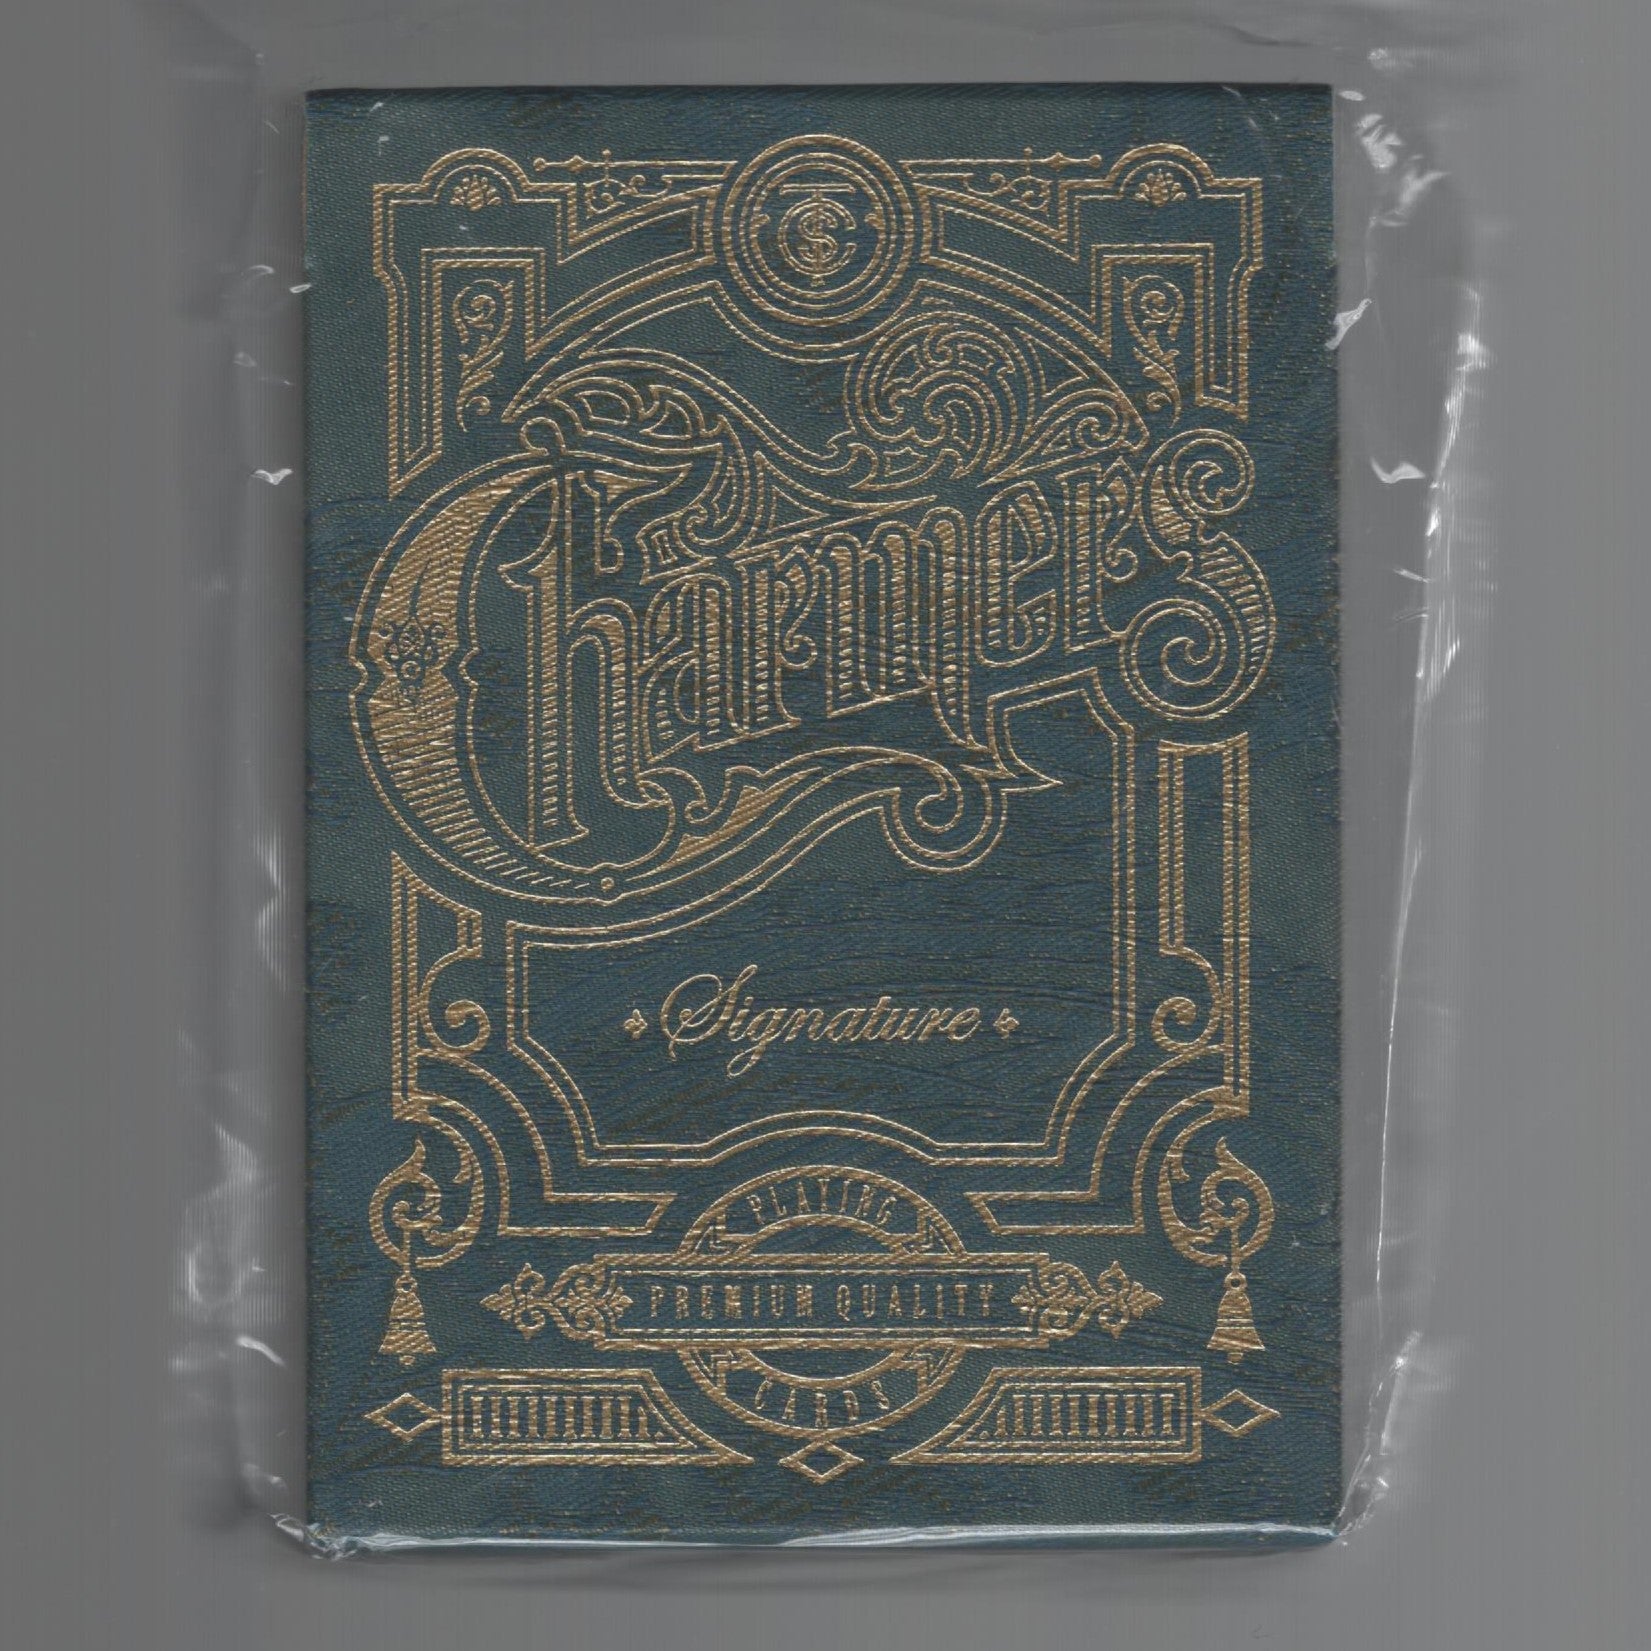 Charmers Signature Edition (#014/240) [AUCTION]